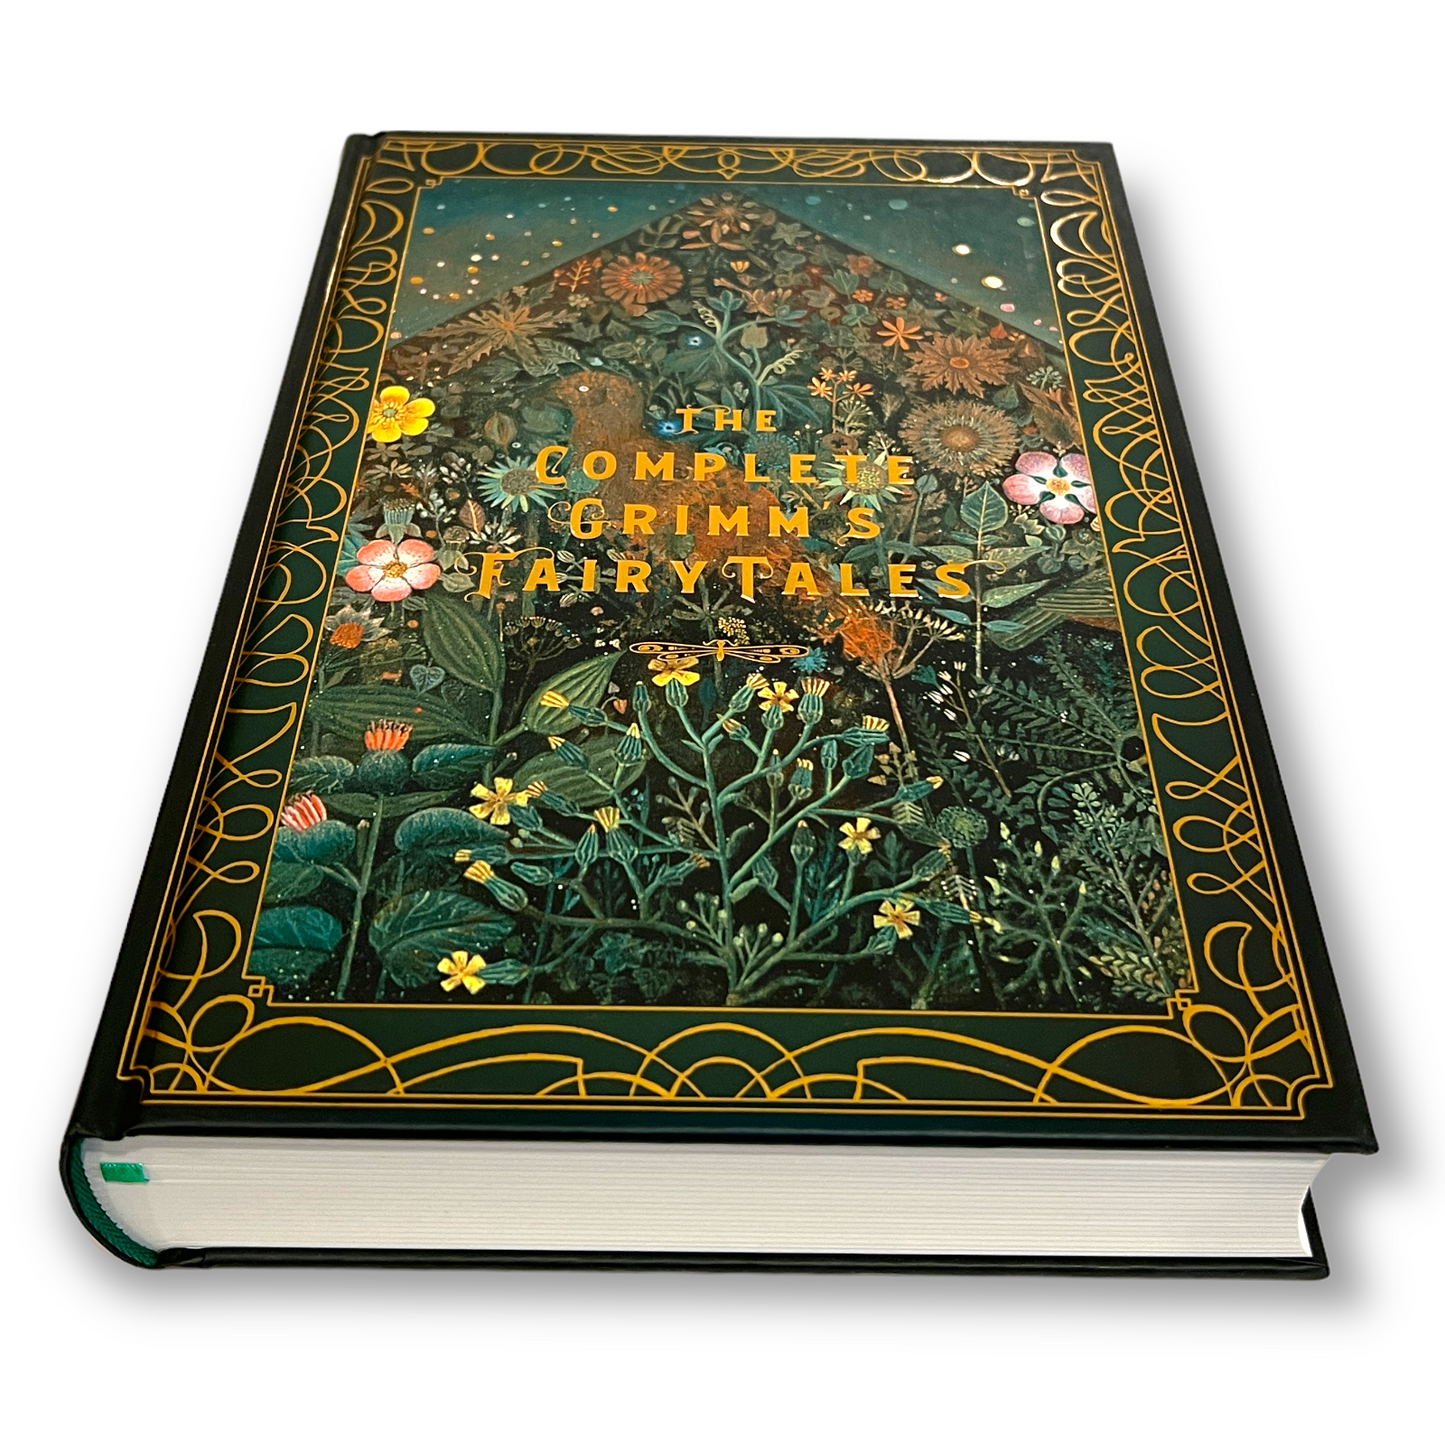 The Complete GRIMM'S FAIRY TALES - Collectible Deluxe Gift Edition - Hardcover Classic Book